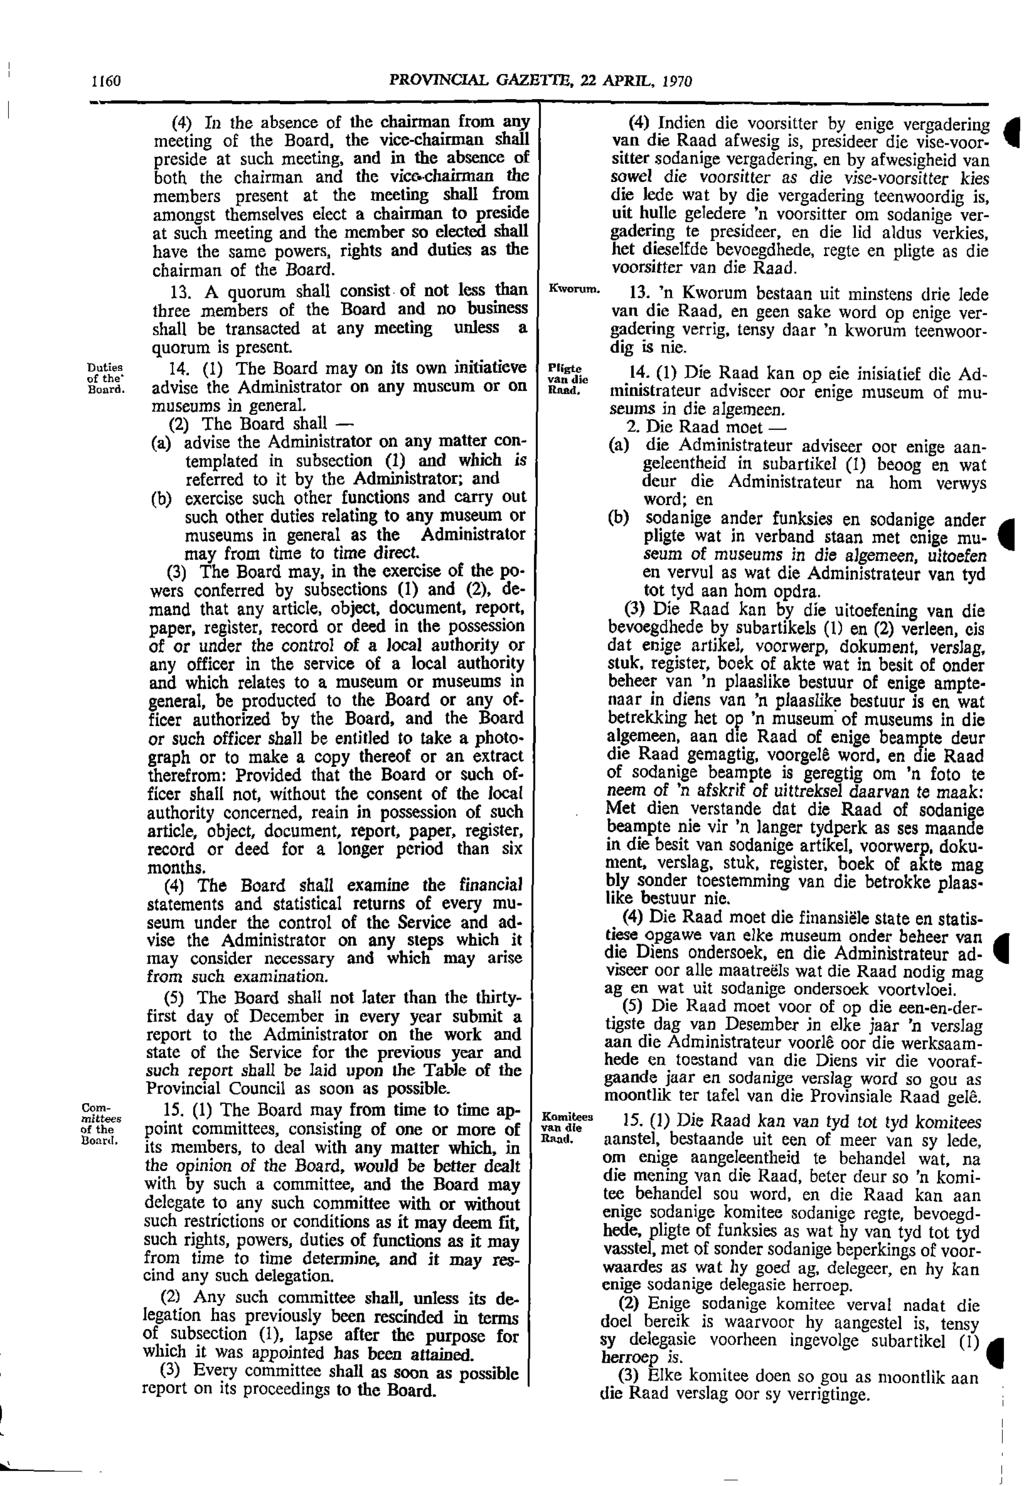 1 1160 PROVINCIAL GAZETTE 22 APRIL 1970 (4) In the absence of the chairman from any (4) Indien die voorsitter by enige vergadering A meeting of the Board the vice chairman shall van die Raad afwesig